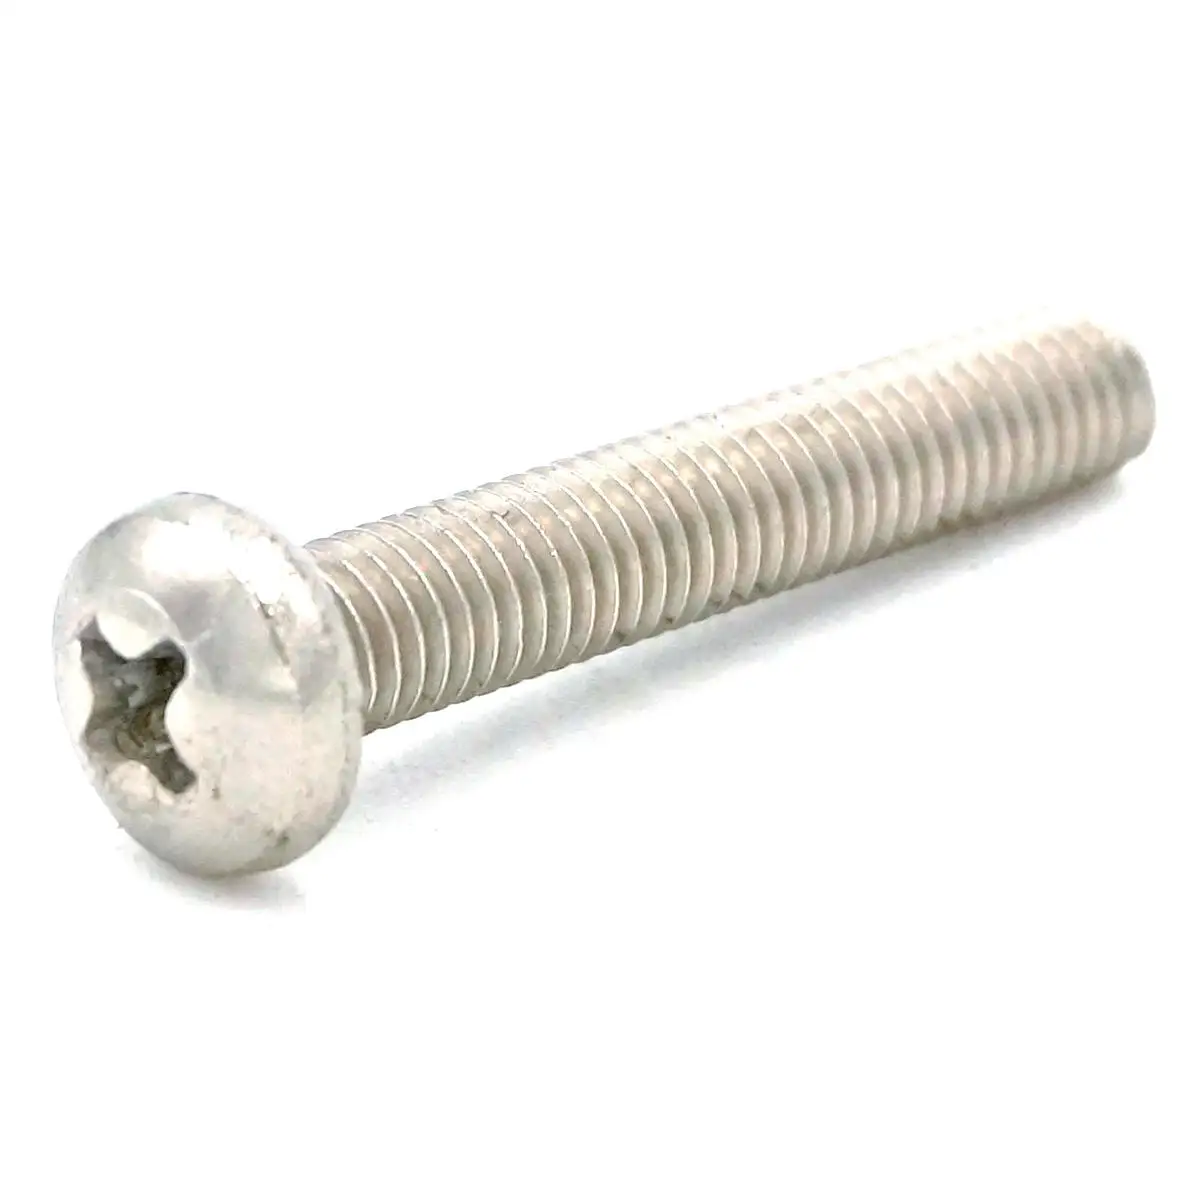 

10pcs M5*30 Pitch 0.8 Phillips Pan Head 304 Stainless Steel Cross Recessed Machine Screws Cap Bolts Nuts